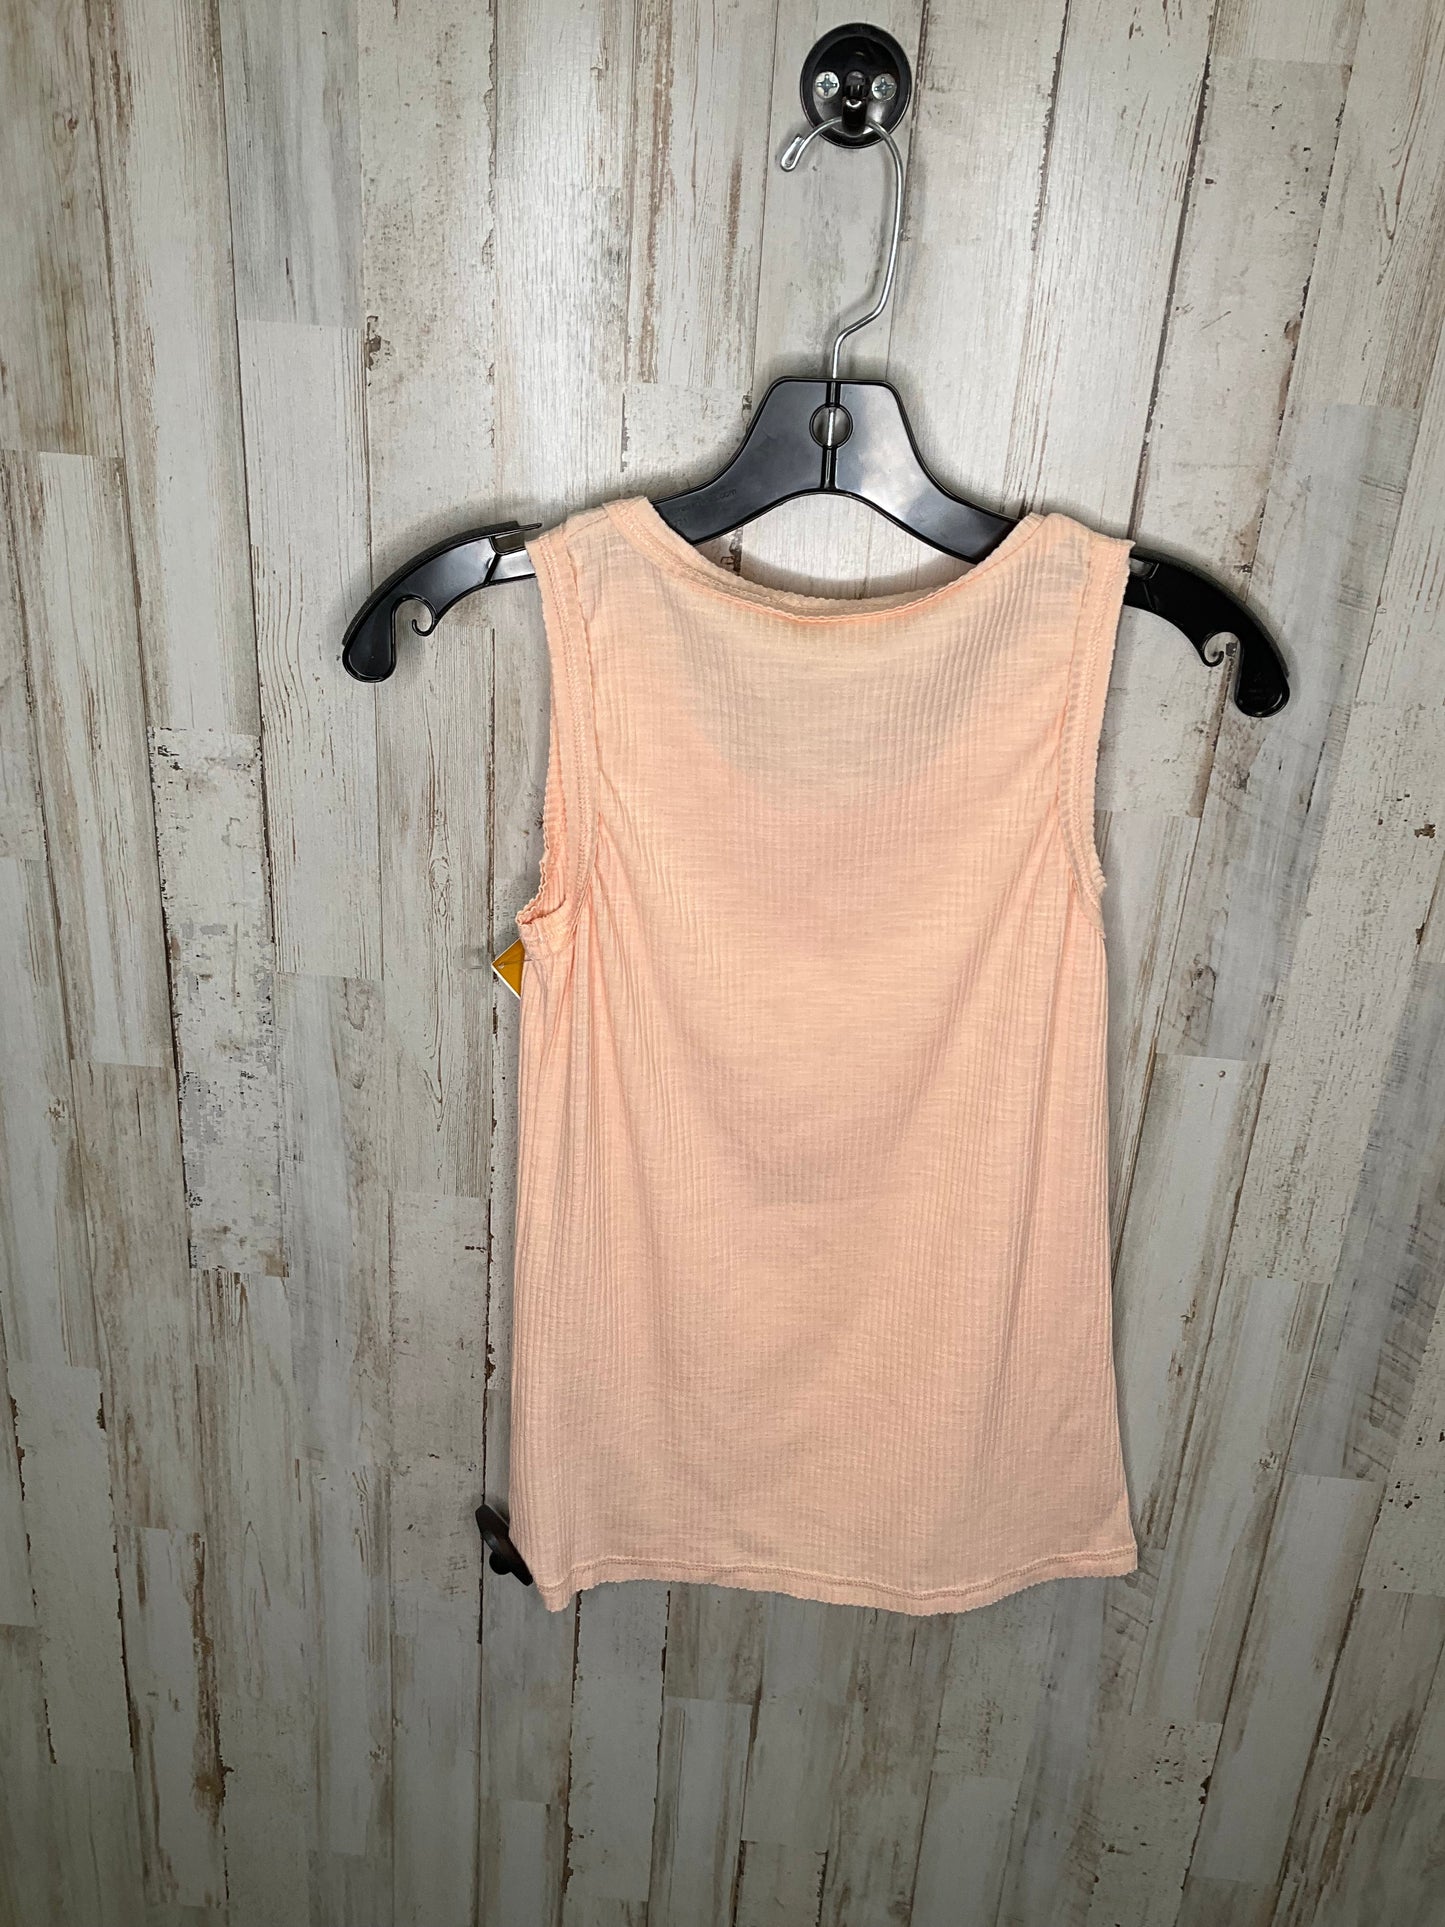 Top Sleeveless By Zenana Outfitters  Size: L